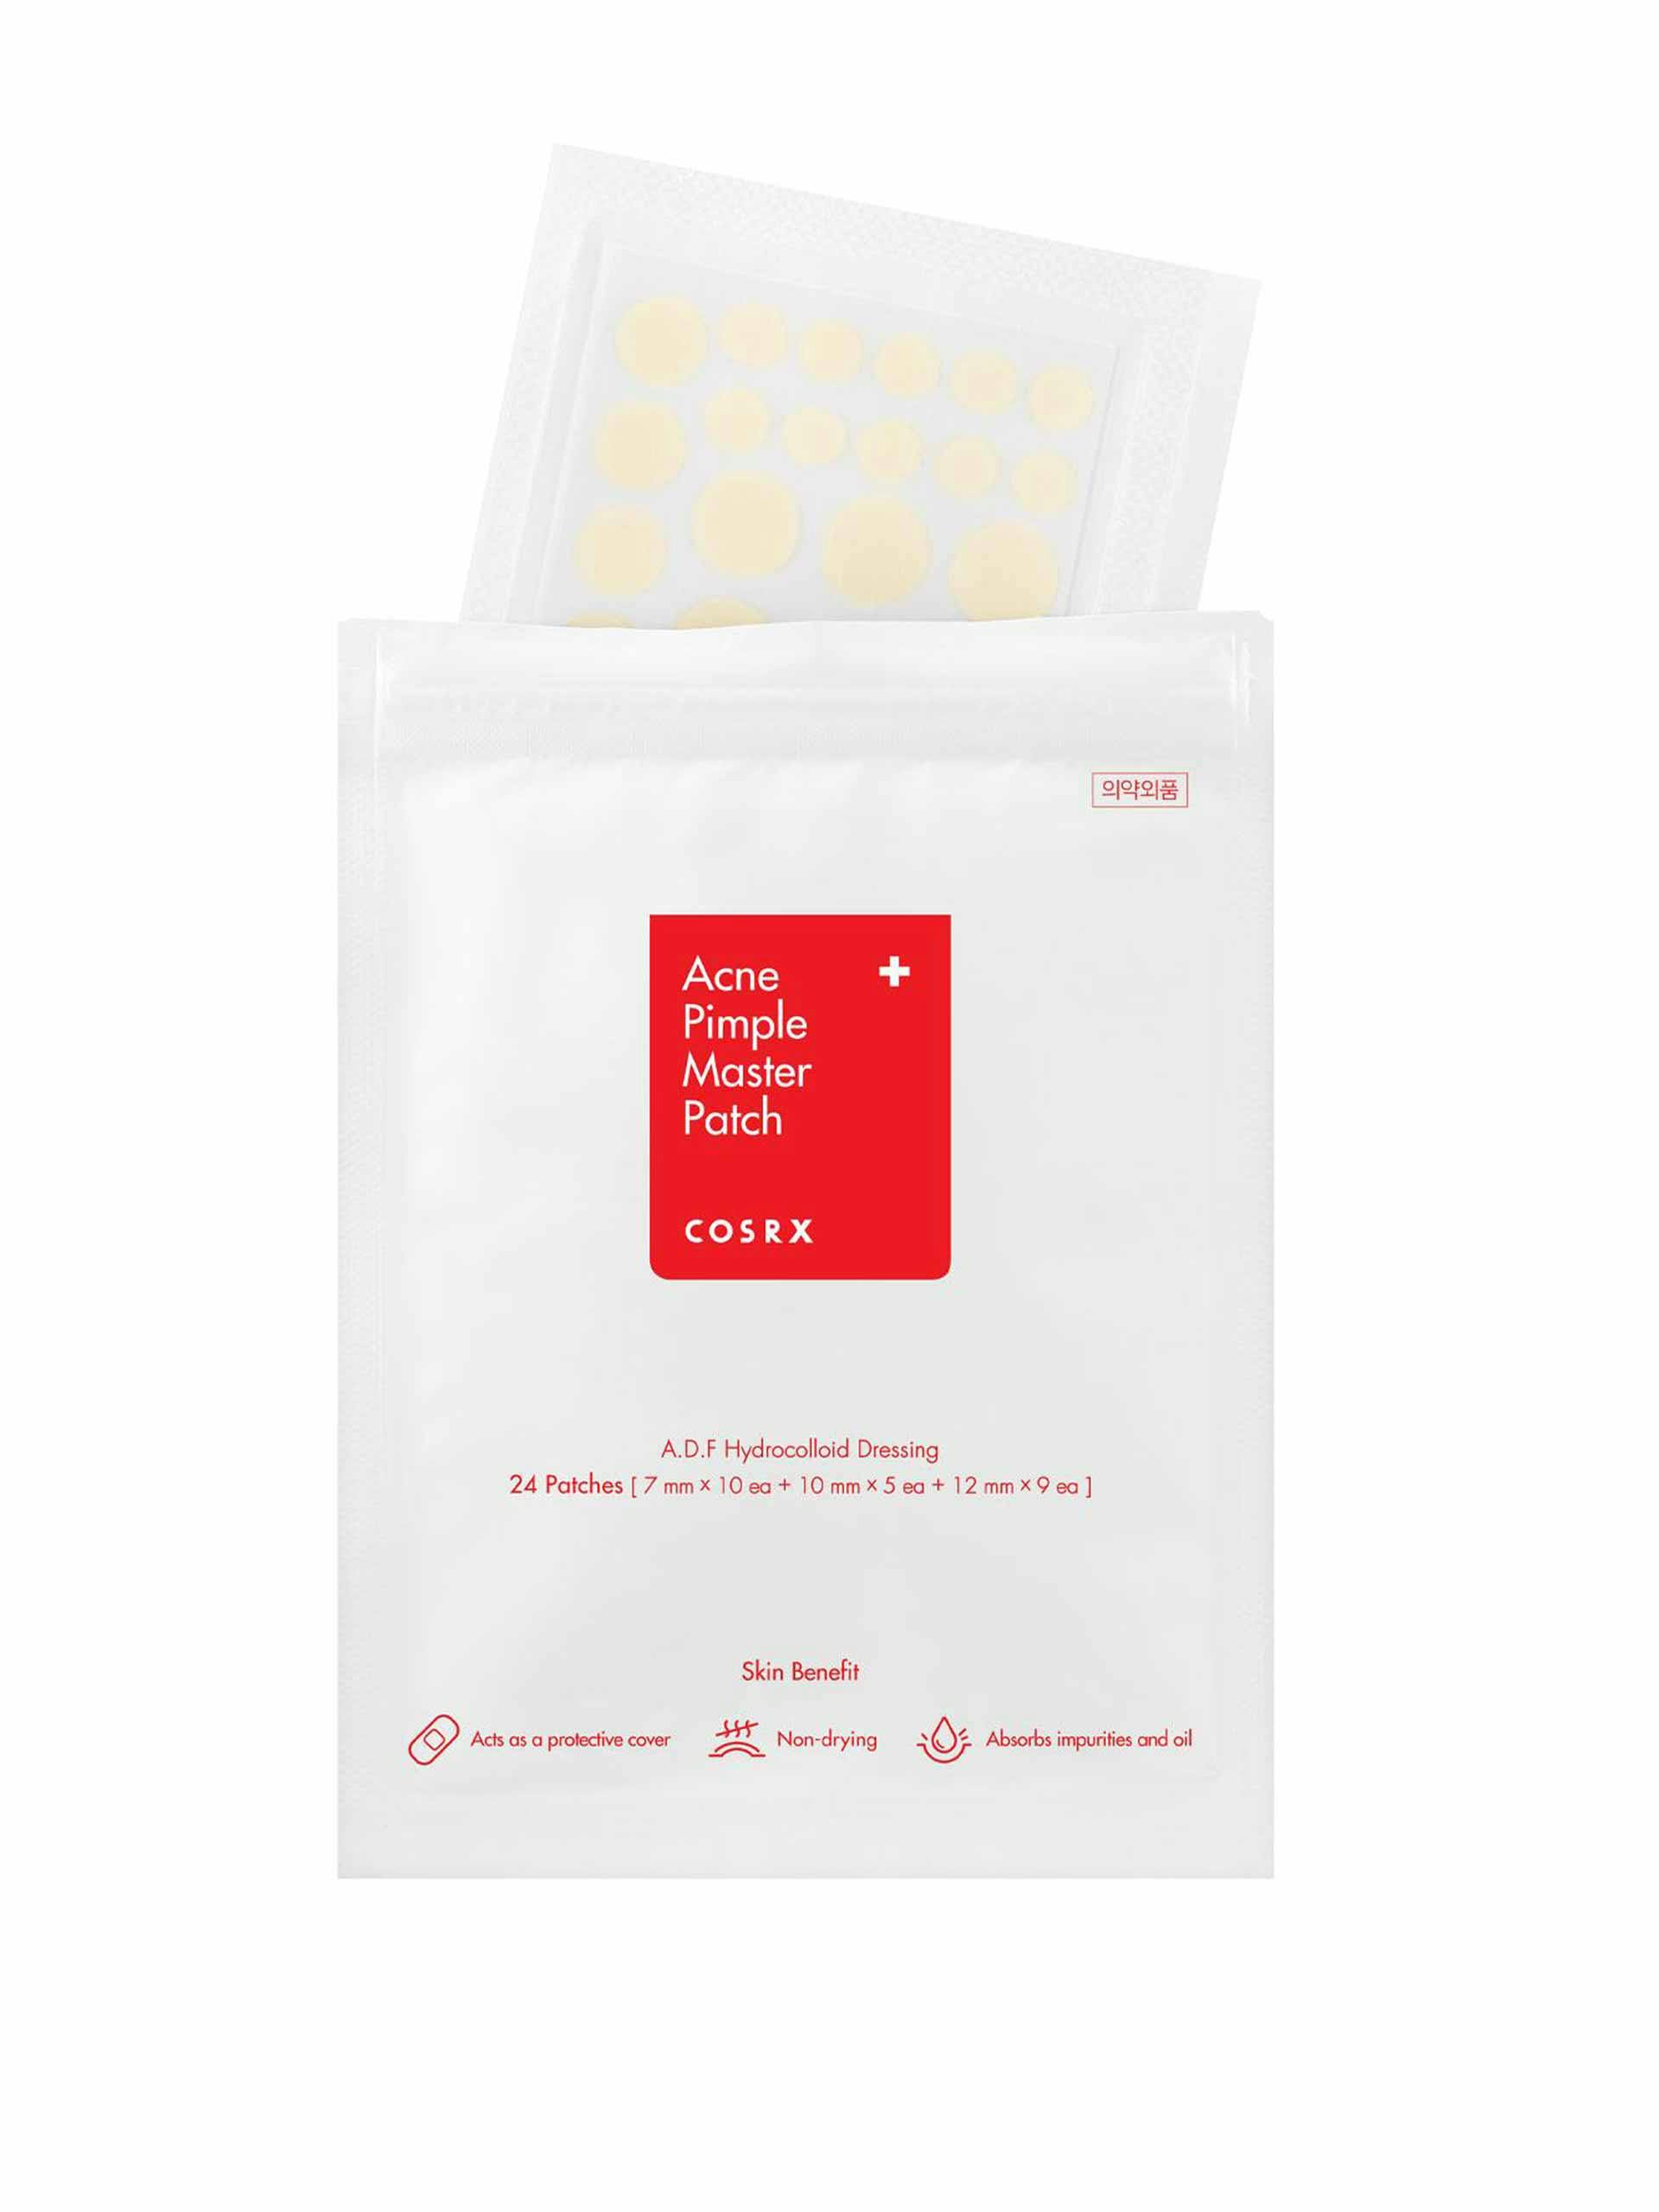 Acne pimple master patch